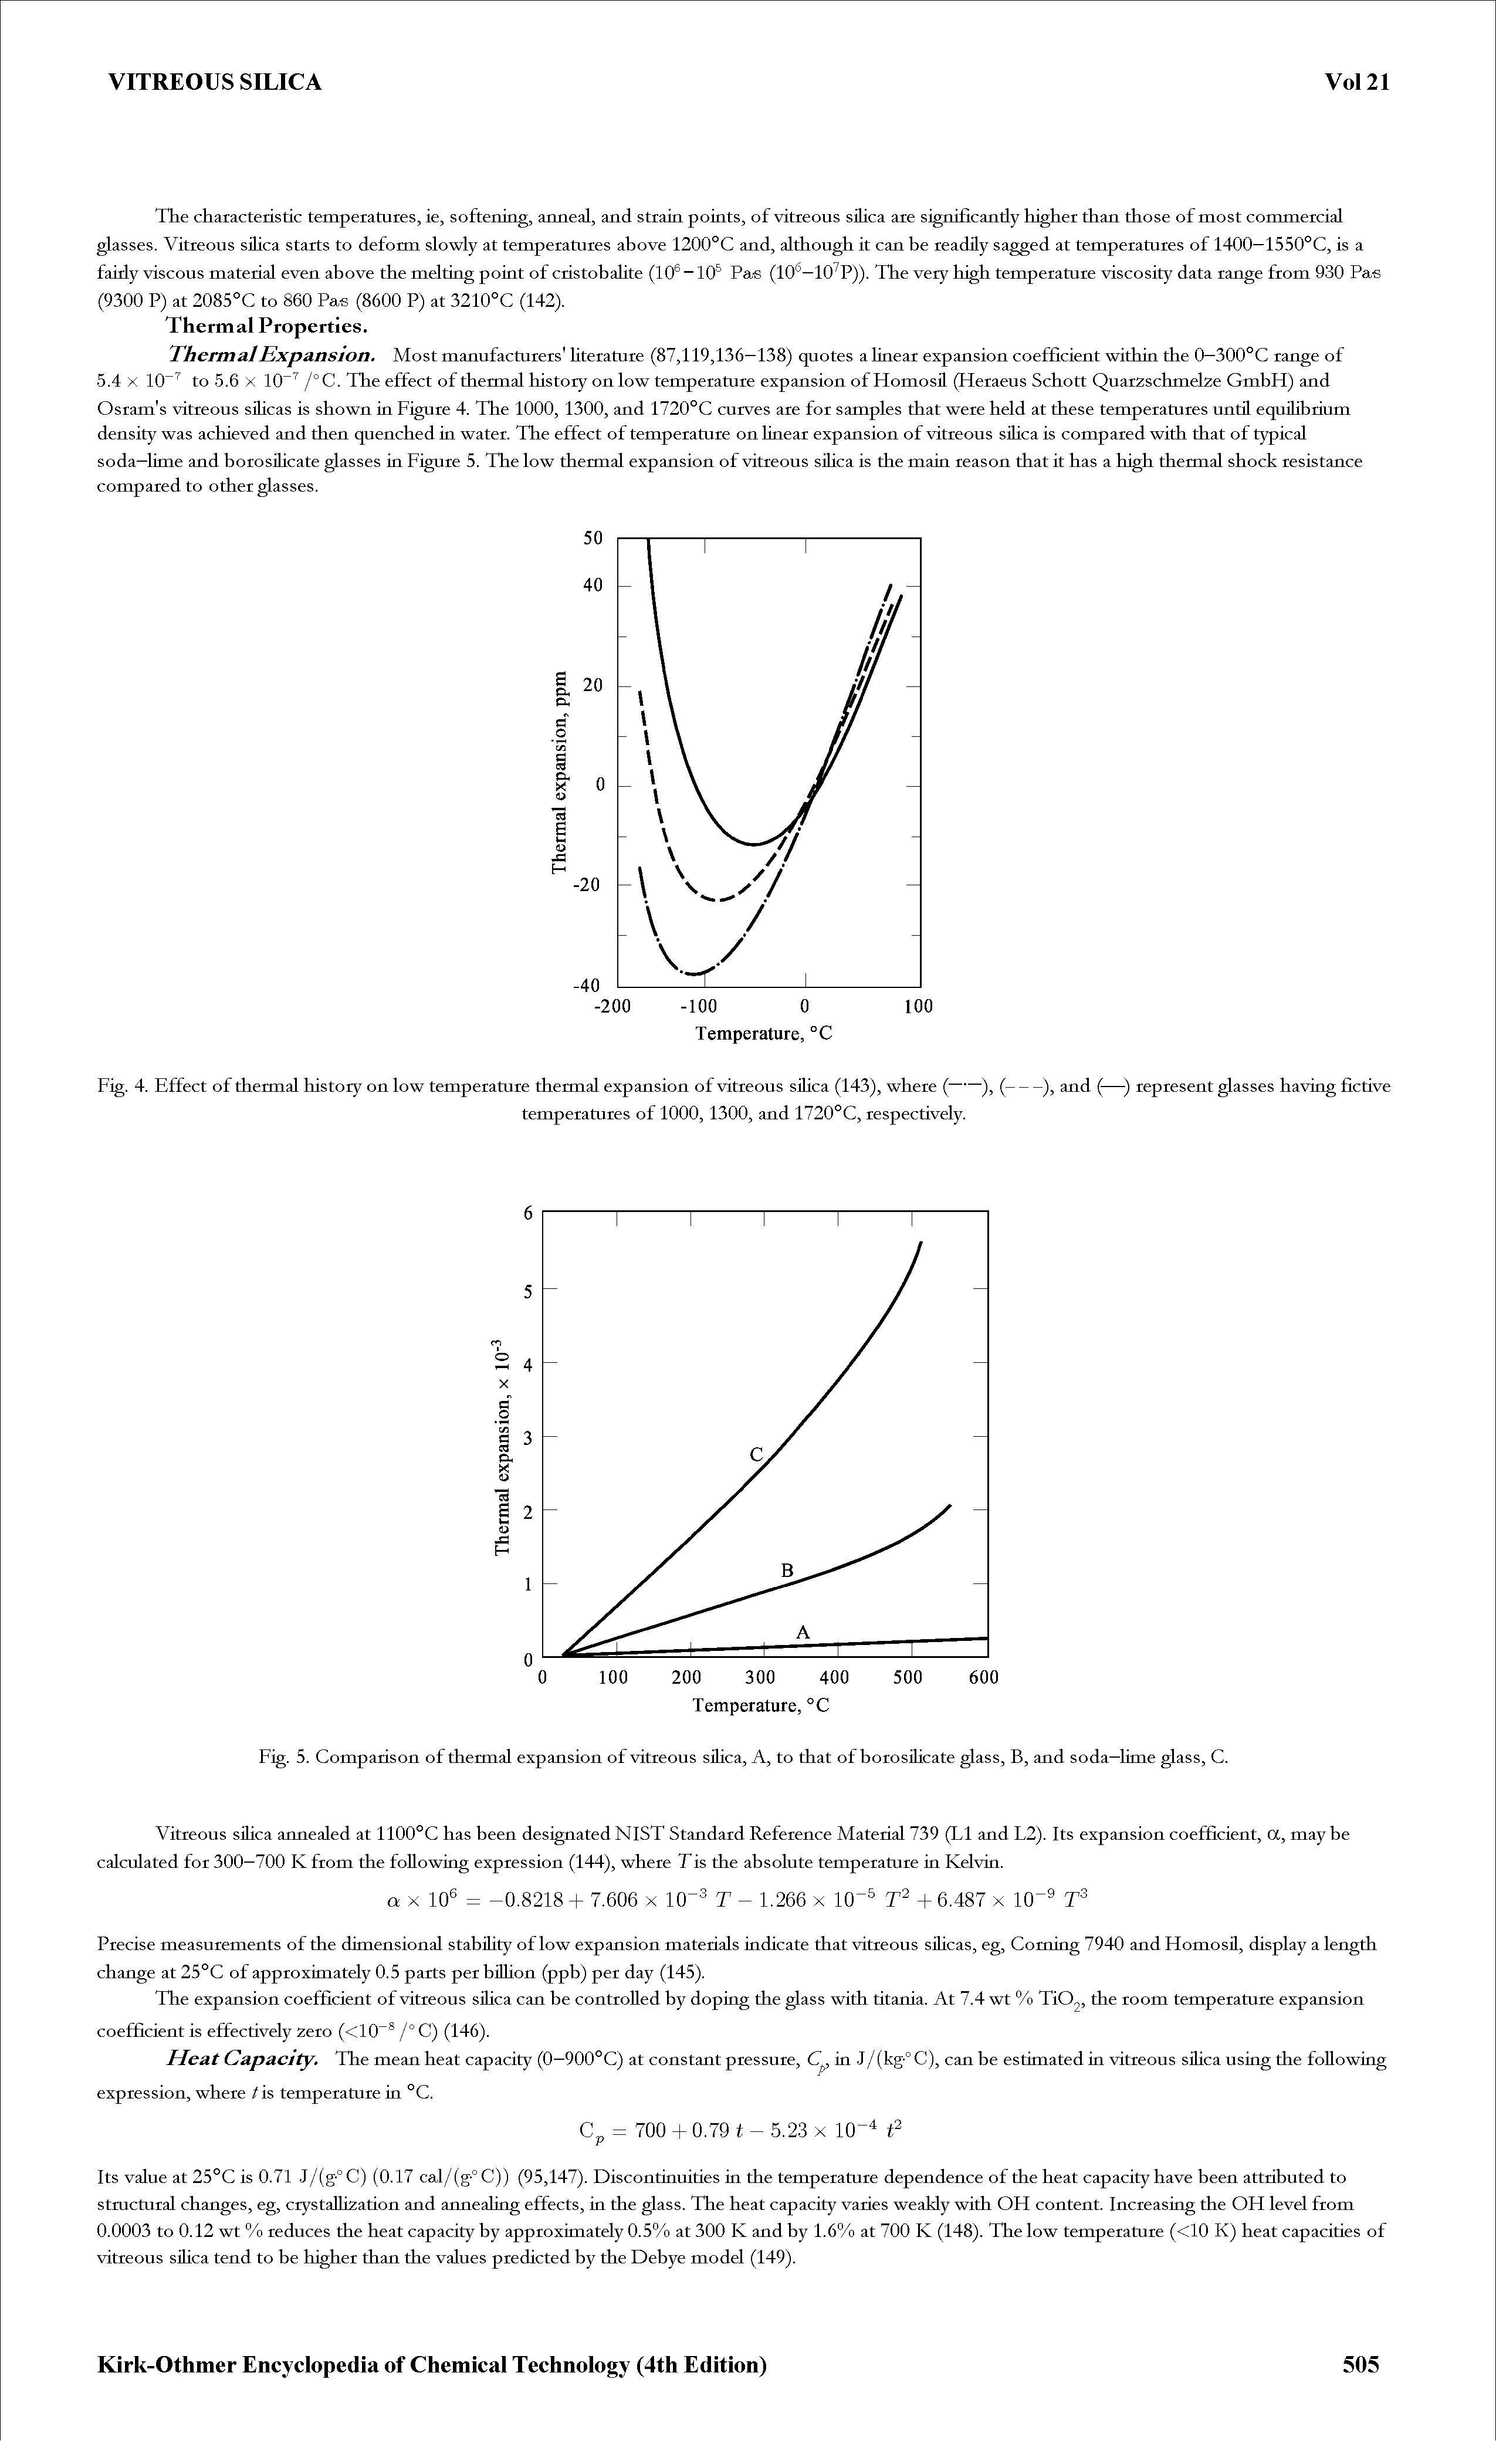 Fig. 5. Comparison of thermal expansion of vitreous siUca, A, to that of borosiUcate glass, B, and soda—lime glass, C.